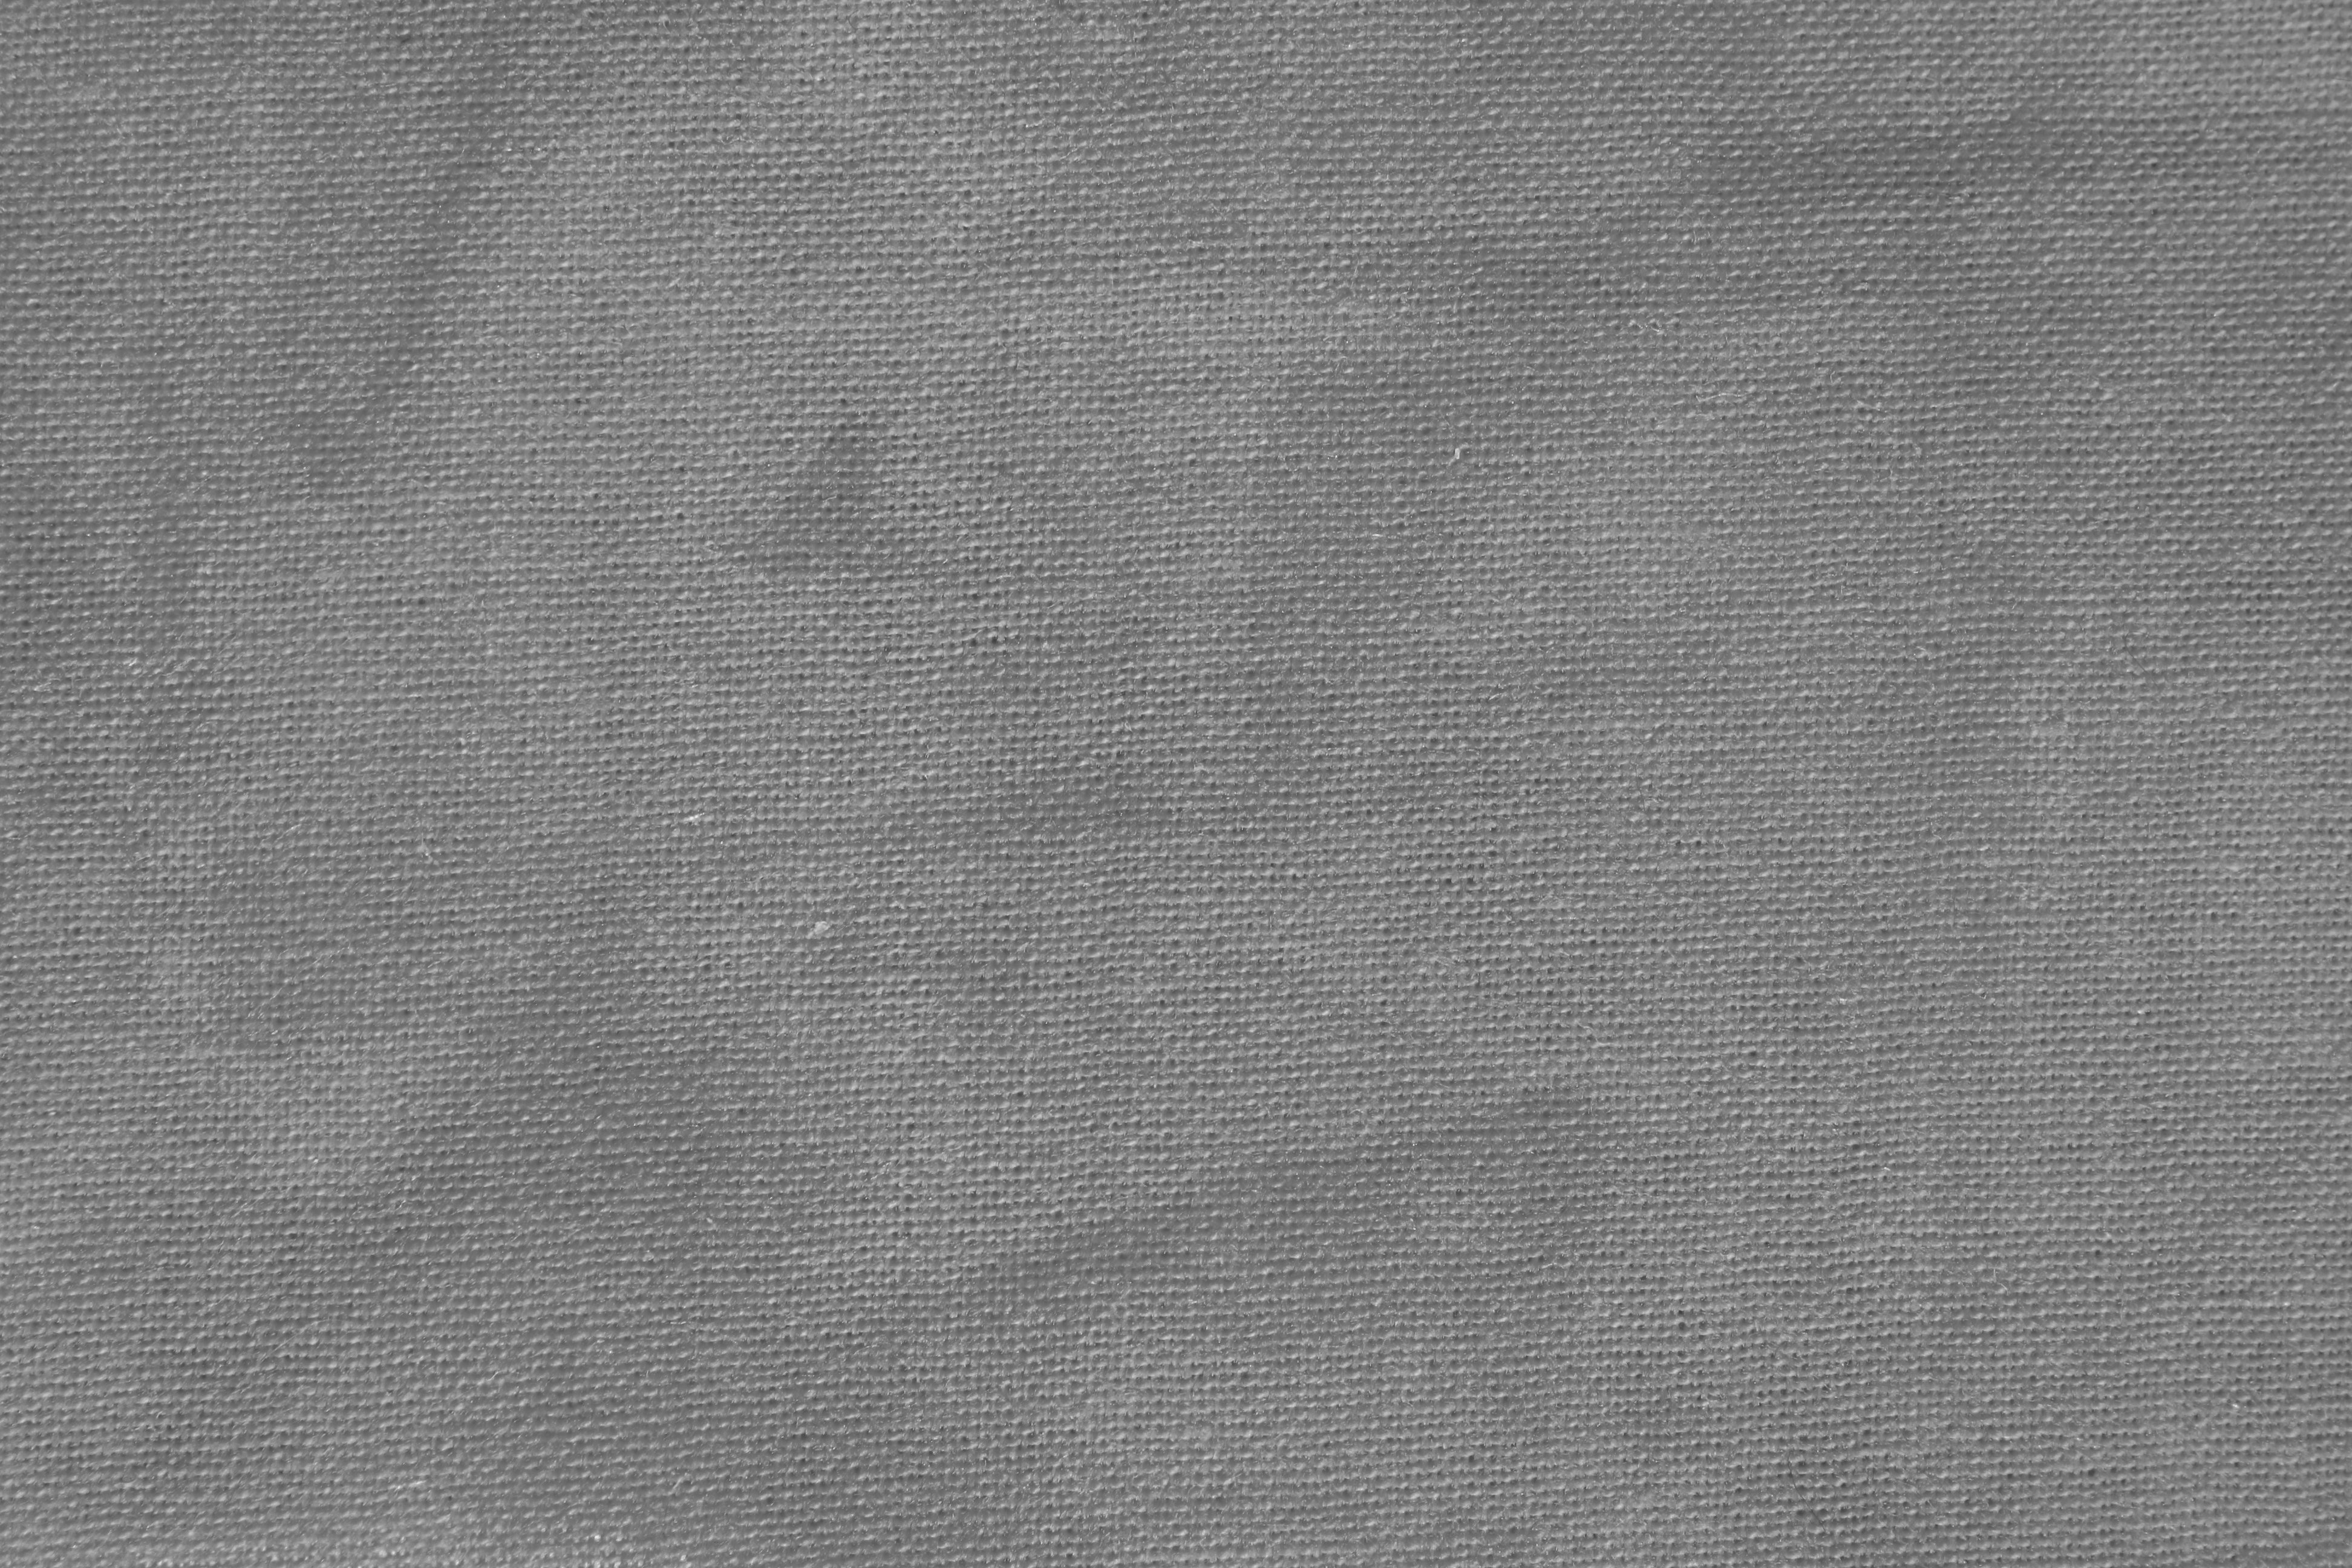 Gray Mottled Fabric Texture Picture | Free Photograph | Photos Public